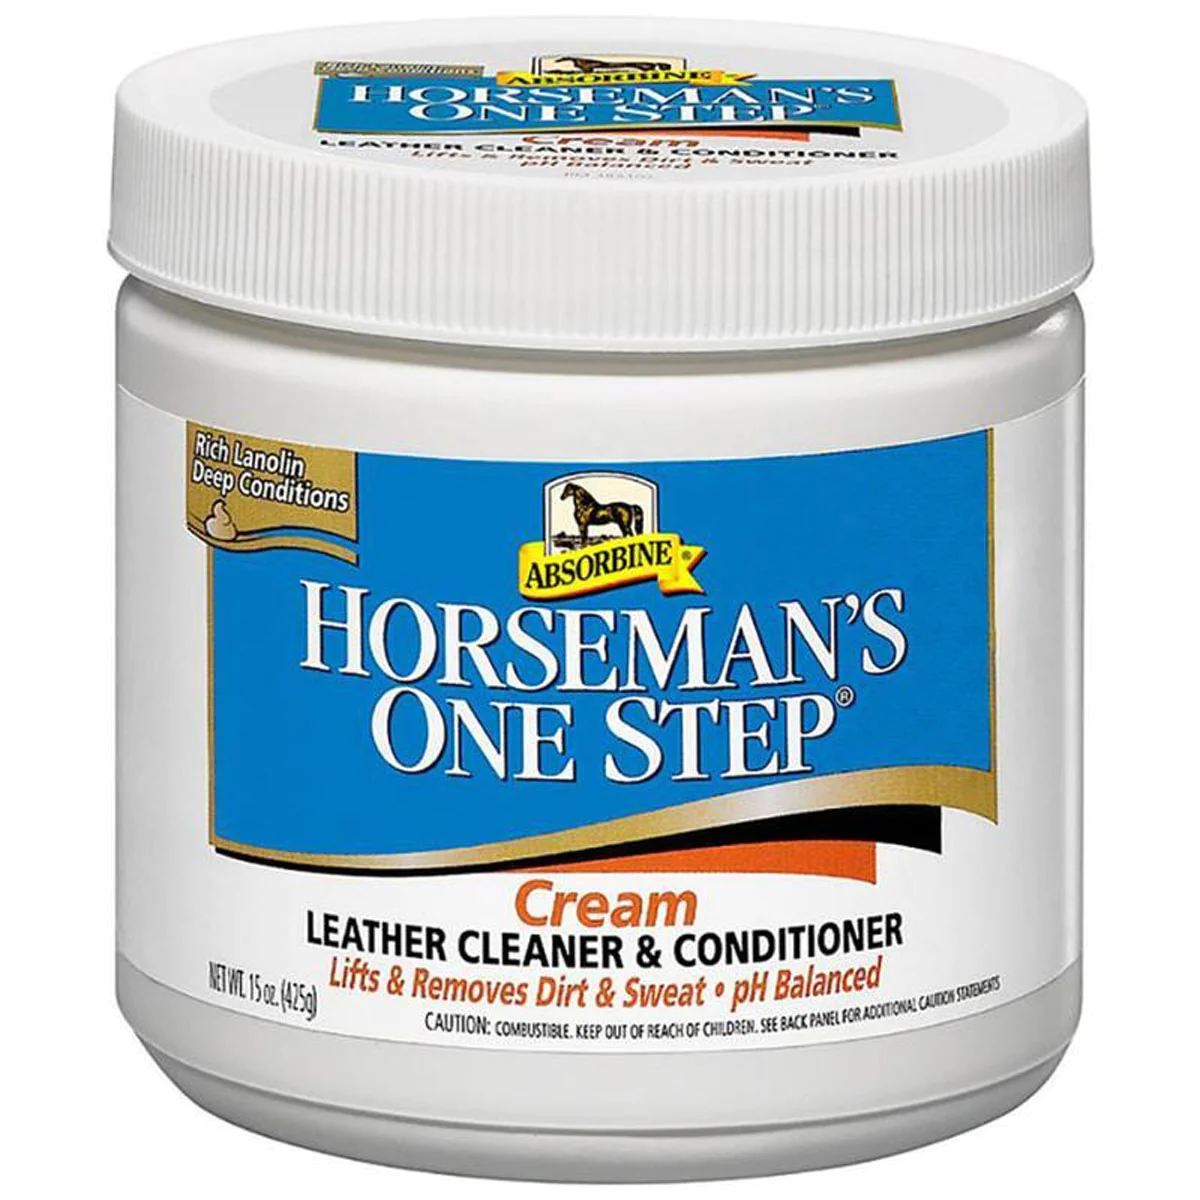 Horseman’s Absorbine One-Step Leather Care is the horseman's one step leather cleaner and conditioner.